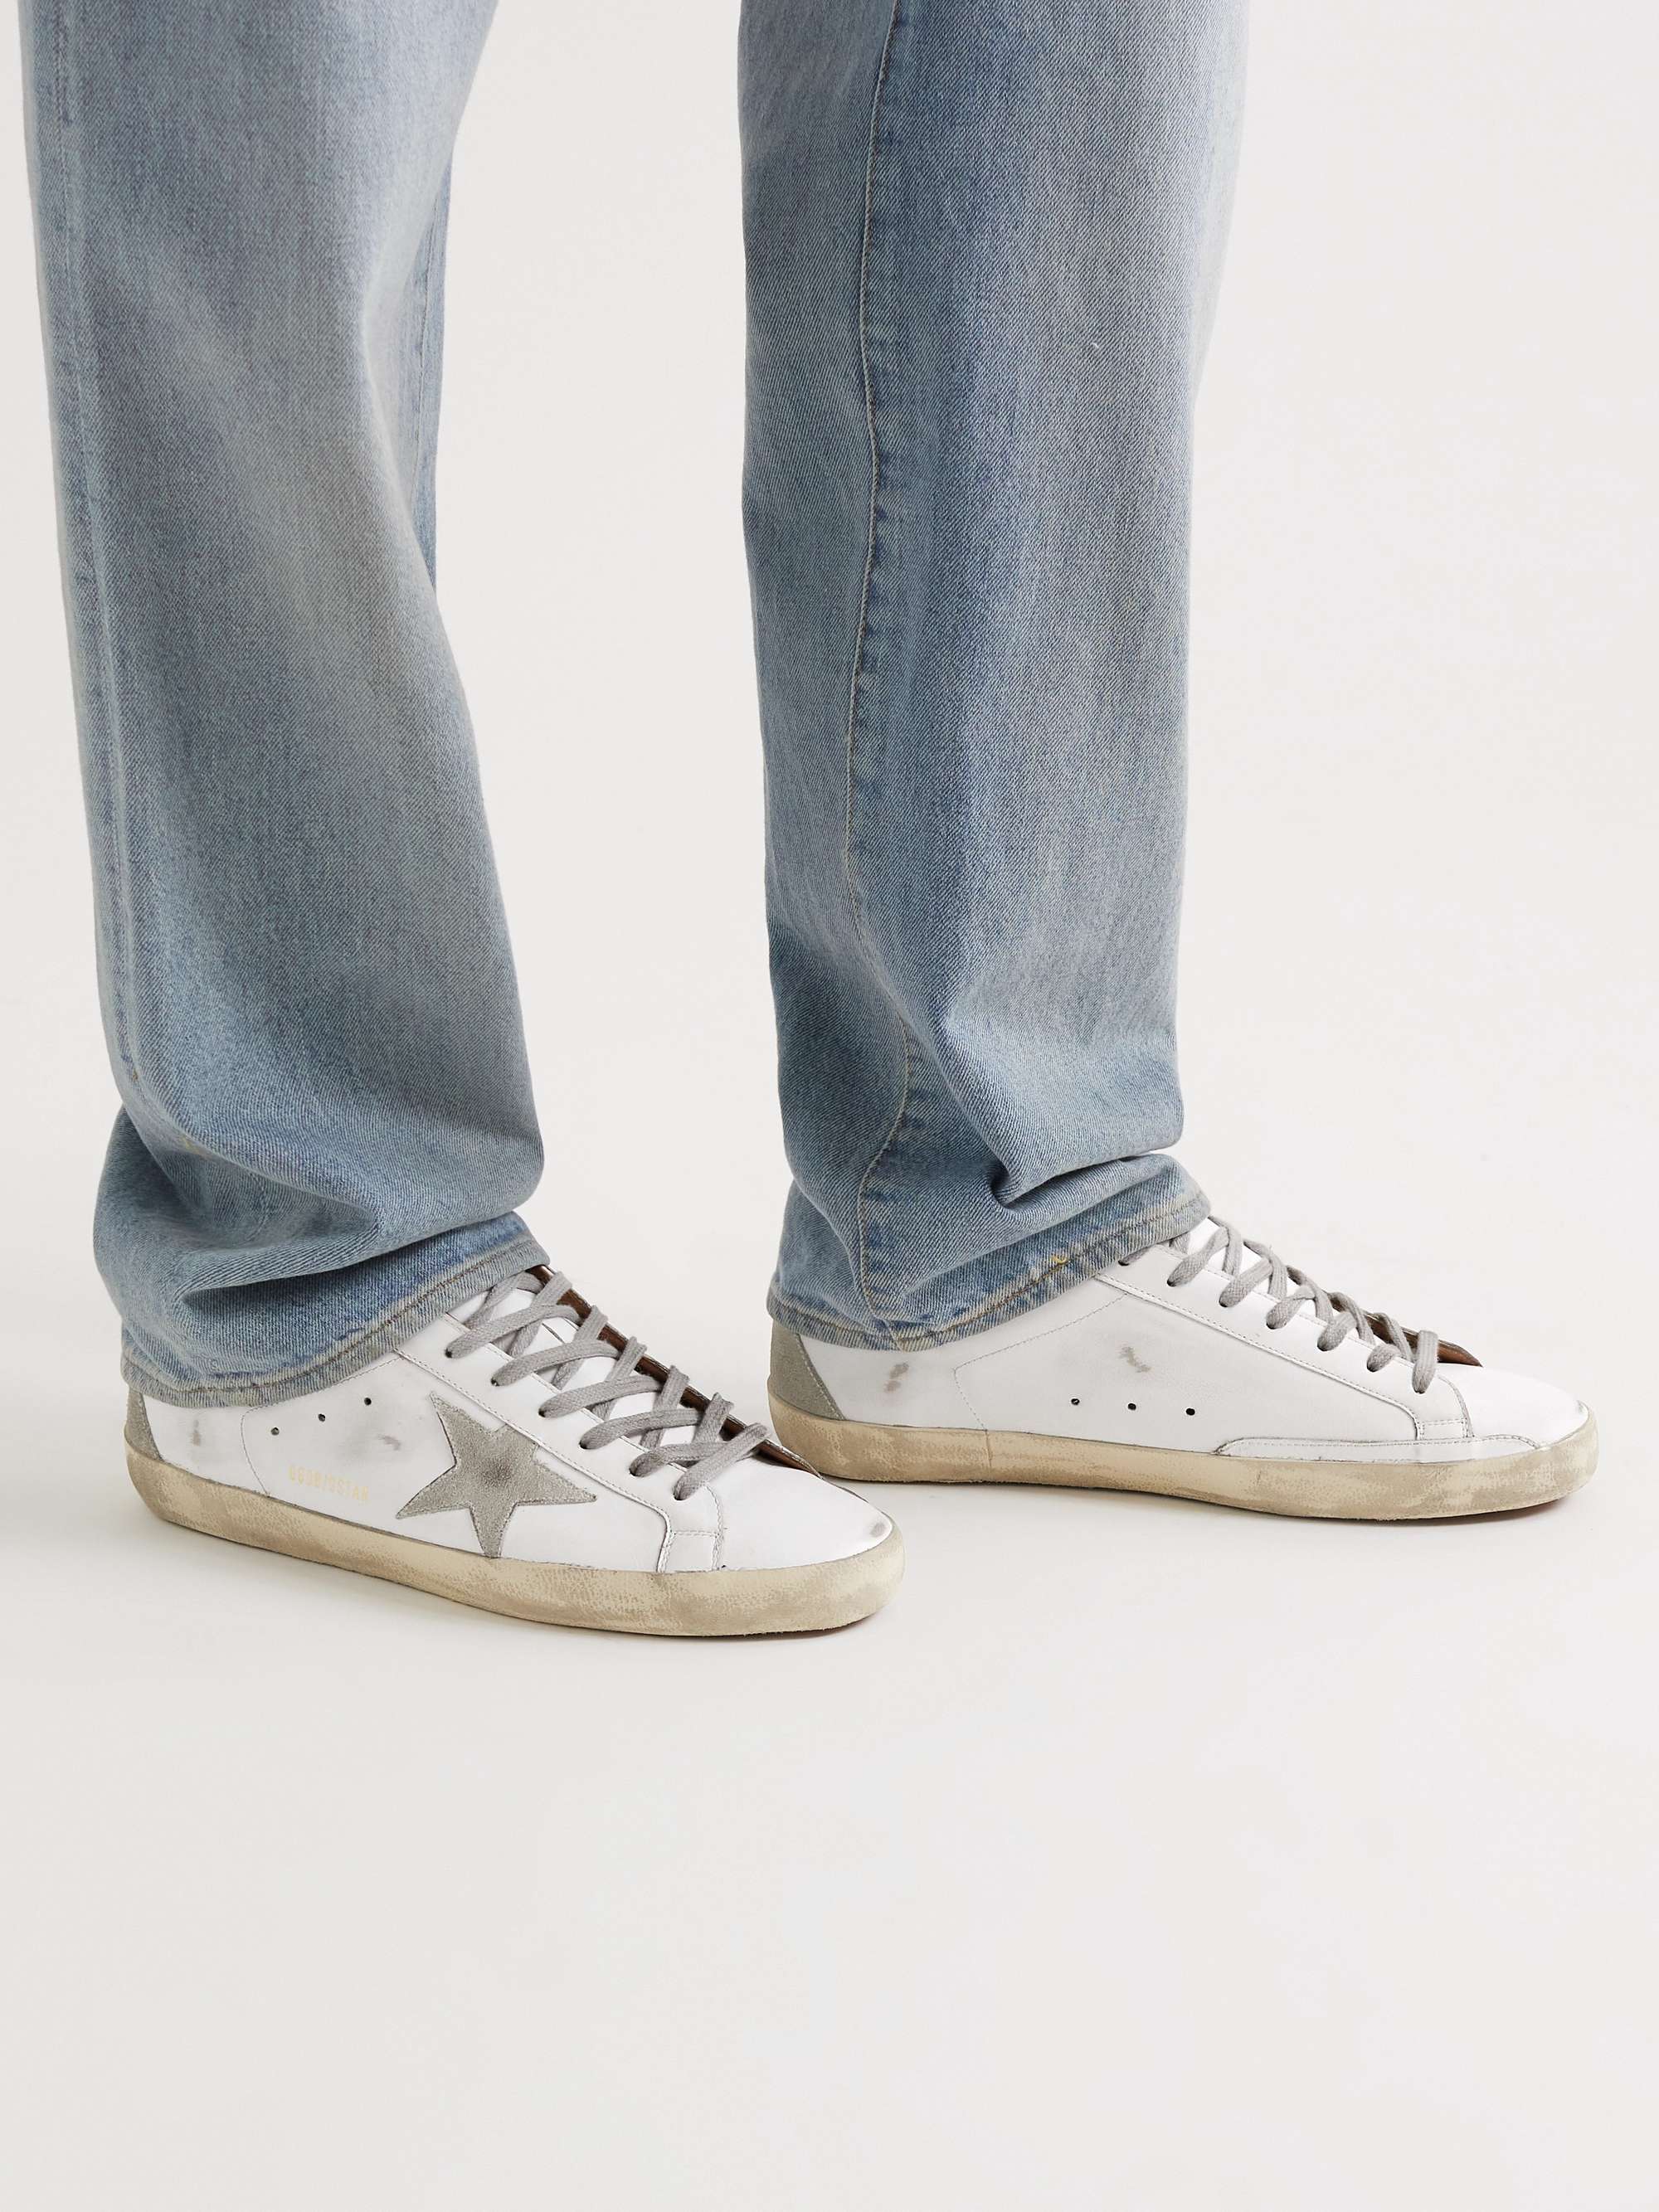 GOLDEN GOOSE DELUXE BRAND Superstar Distressed Leather and Suede Sneakers |  MR PORTER